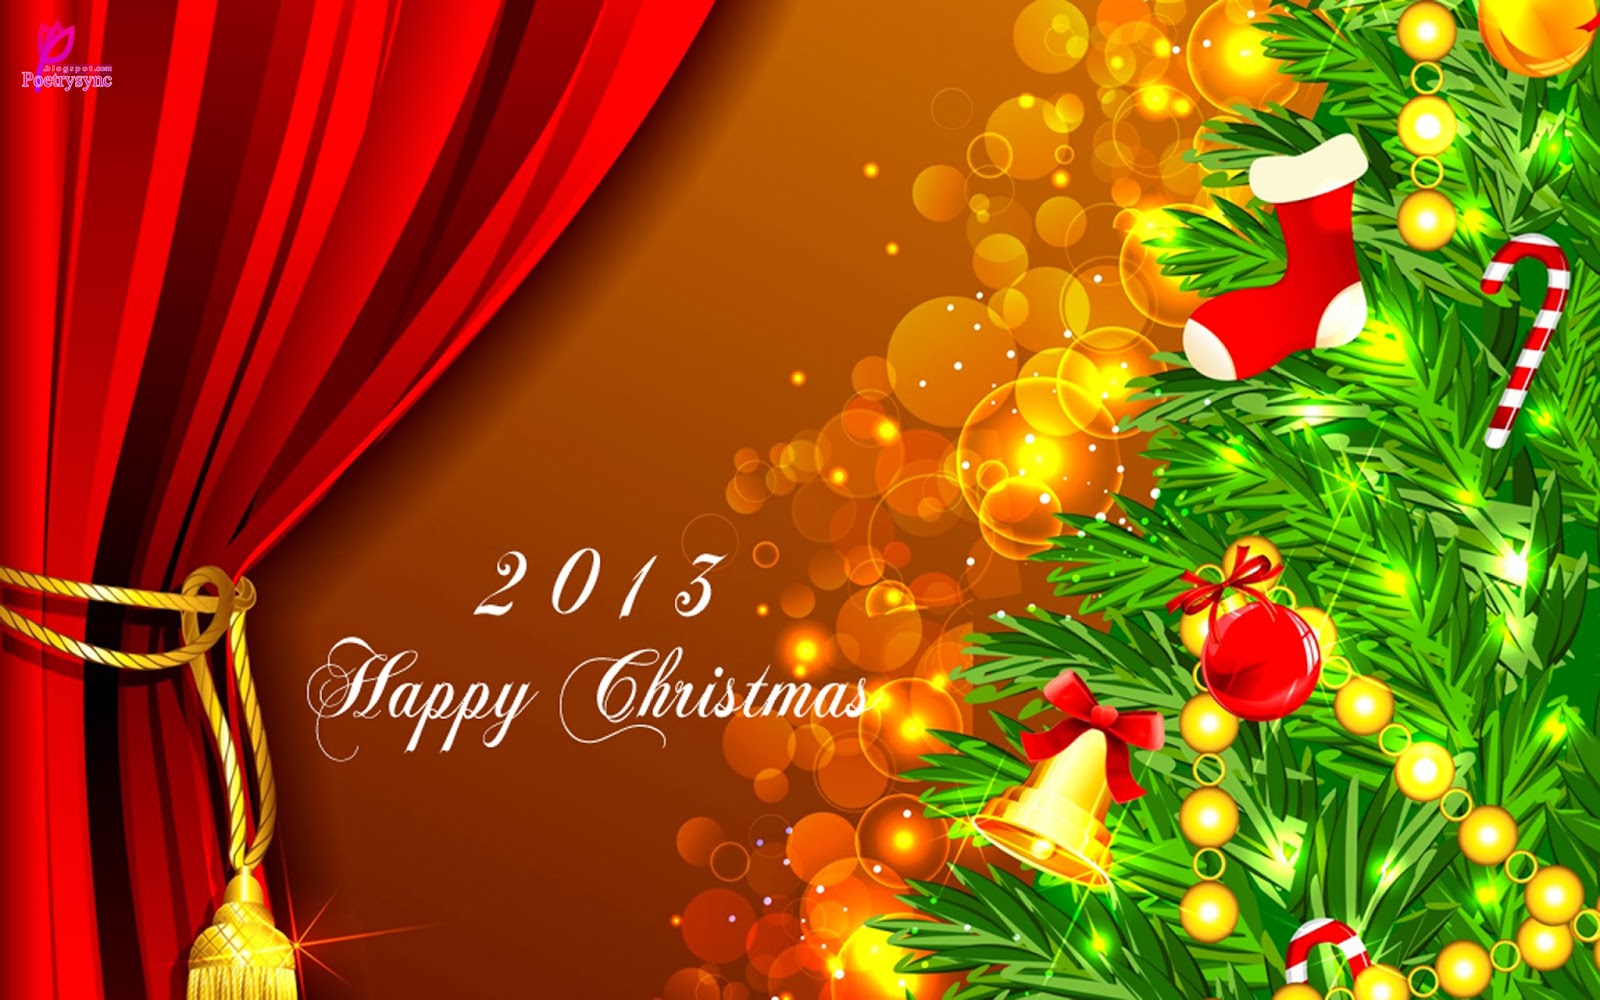 Happy Christmas Wishes Picture Wallpaper Image Background For